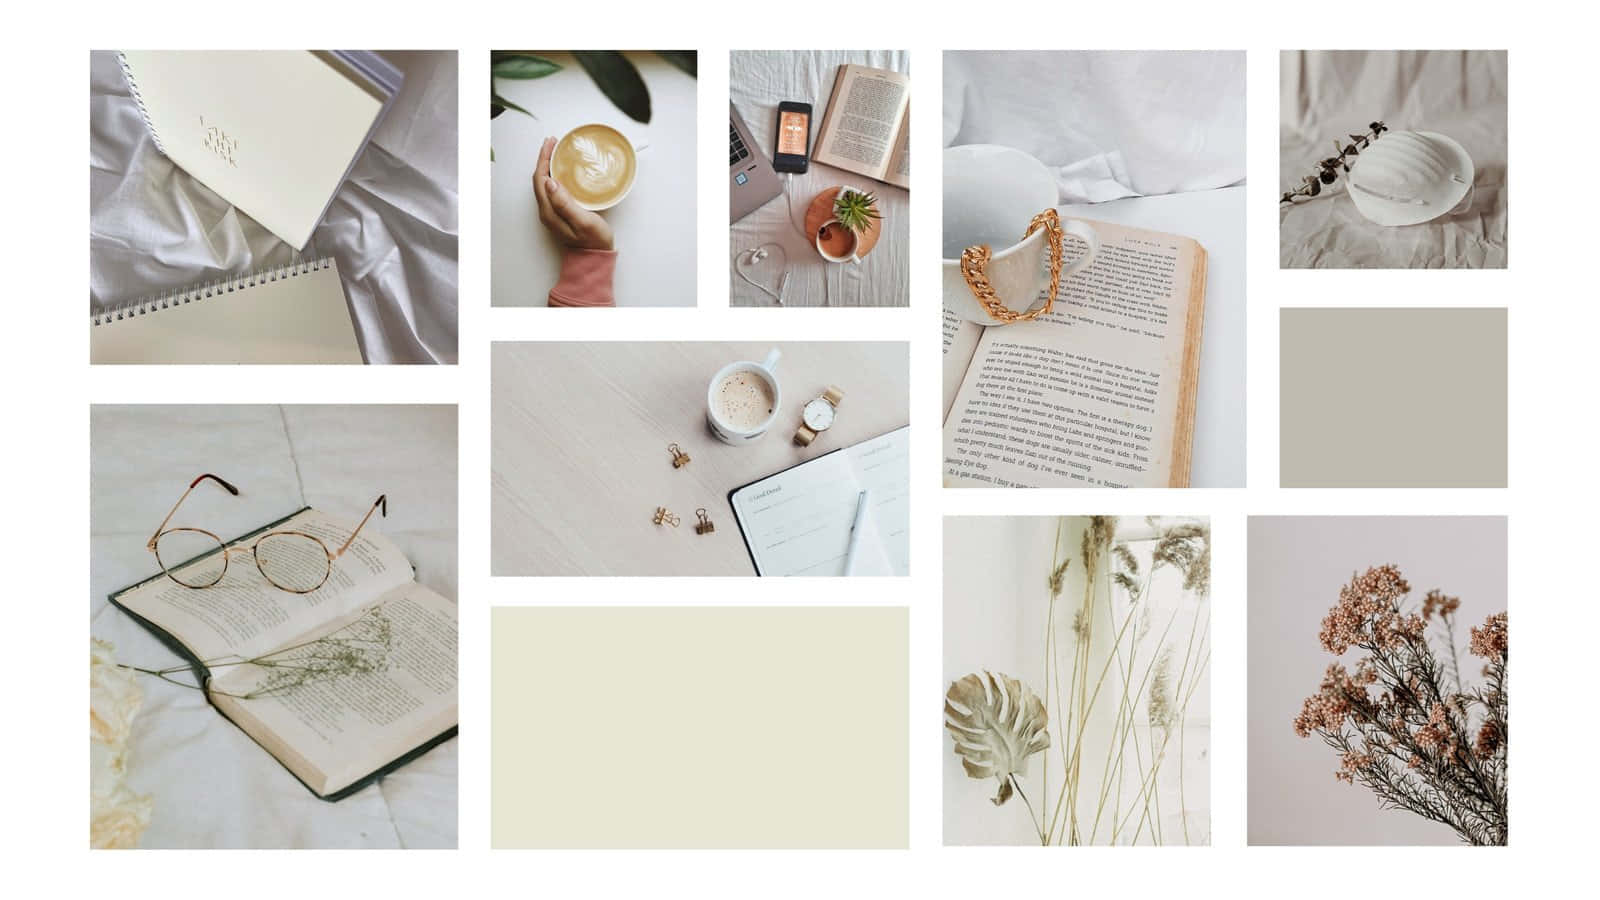 A Collage Of Photos With Books, Flowers And Other Items Wallpaper